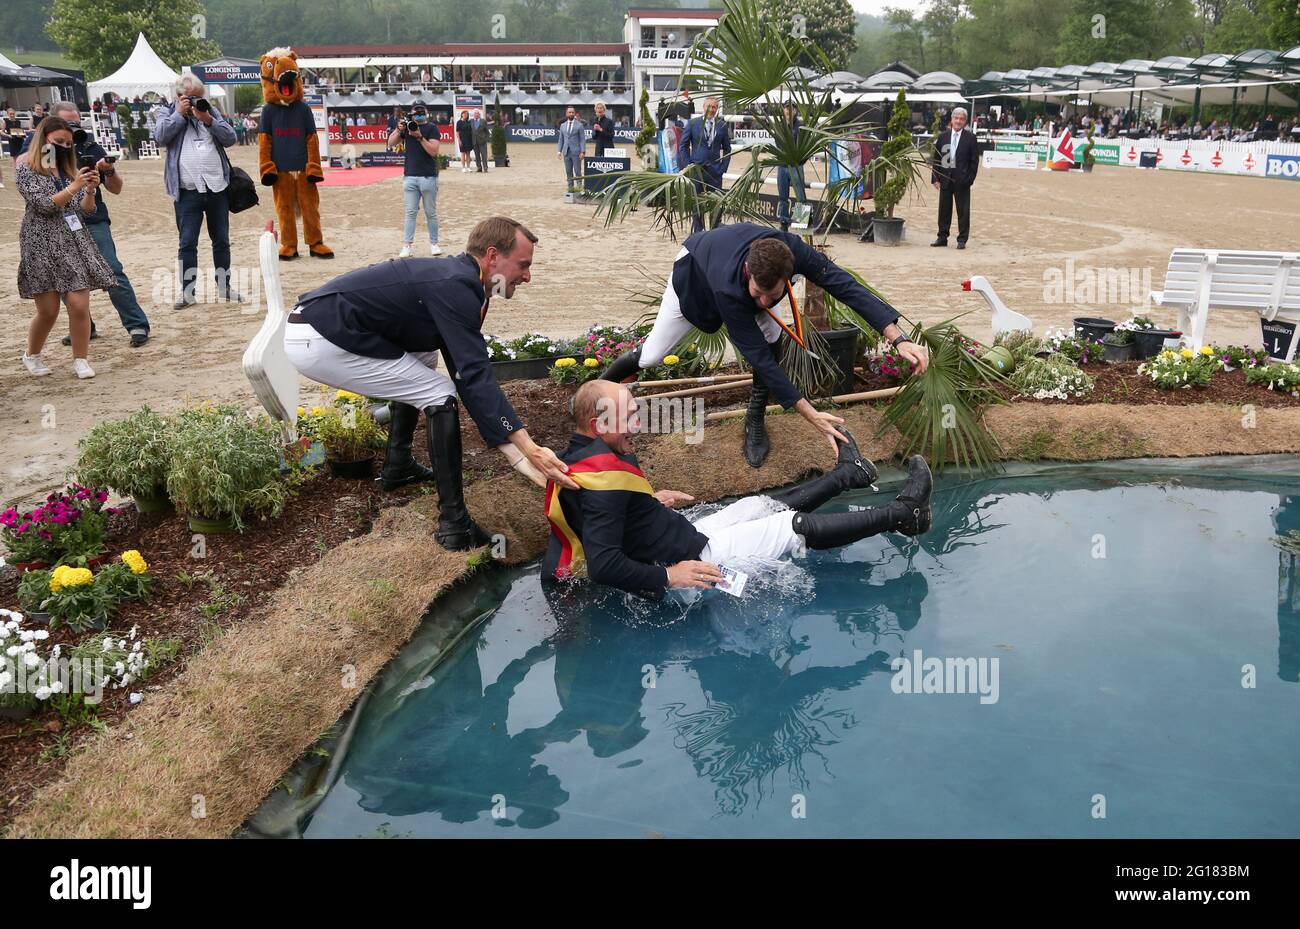 Balve, Germany. 05th June, 2021. Equestrian sport: German Championship, Show Jumping. The show jumper Tobias Meyer (M) celebrates winning the German Show Jumping Championship with the second placed Maximilian Weishaupt (r) and the third placed Patrick Stühlmeyer. Credit: Friso Gentsch/dpa/Alamy Live News Stock Photo